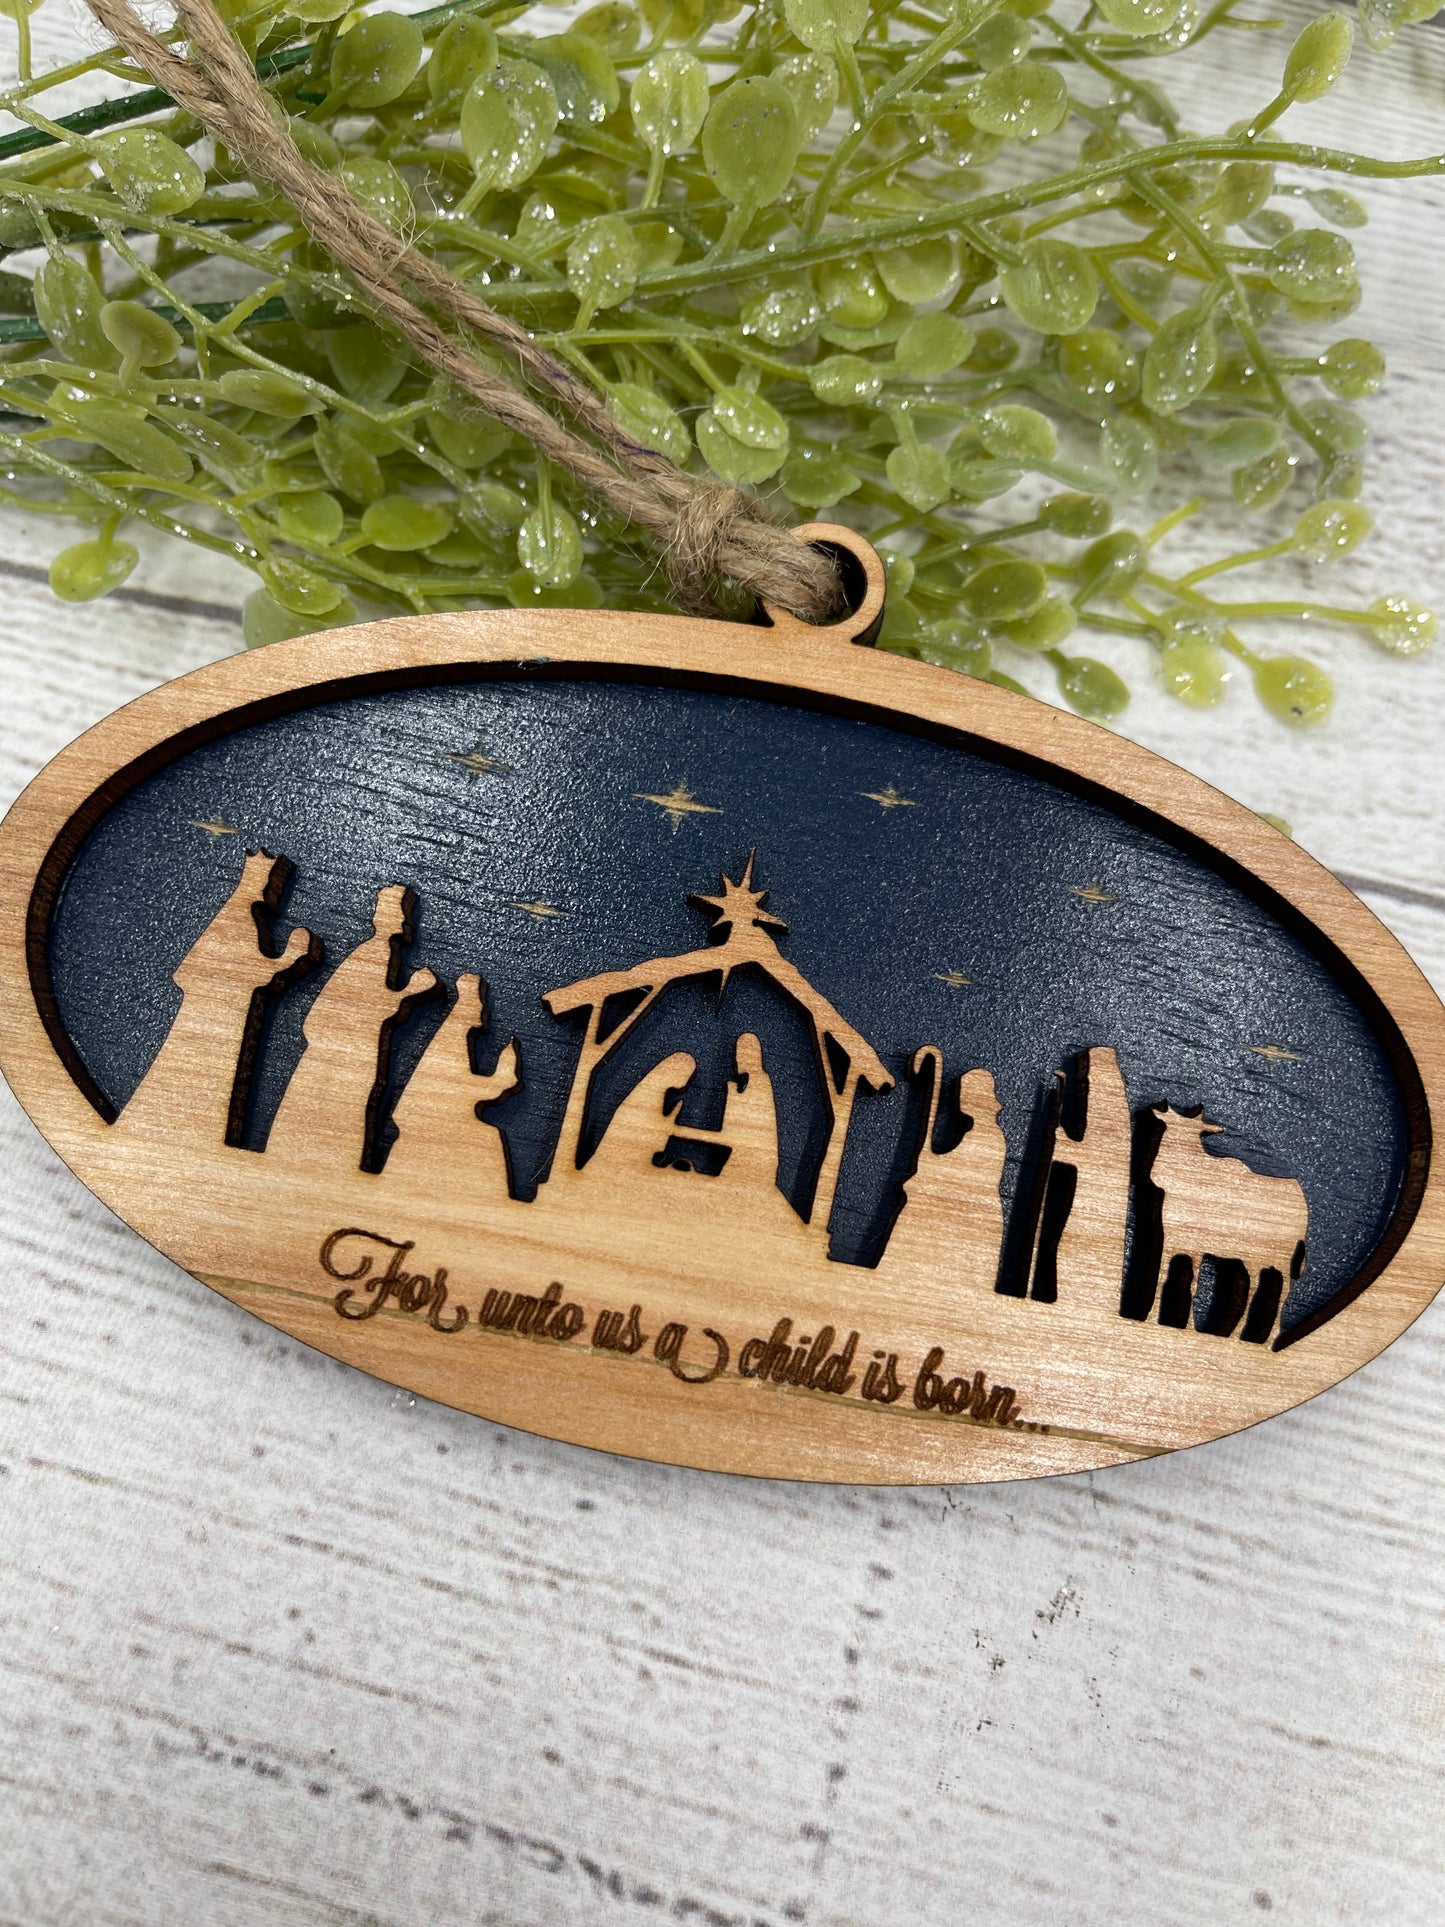 Oval Christmas Nativity Manger Scene Religious Wood Ornament - For Unto Us a Child is Born